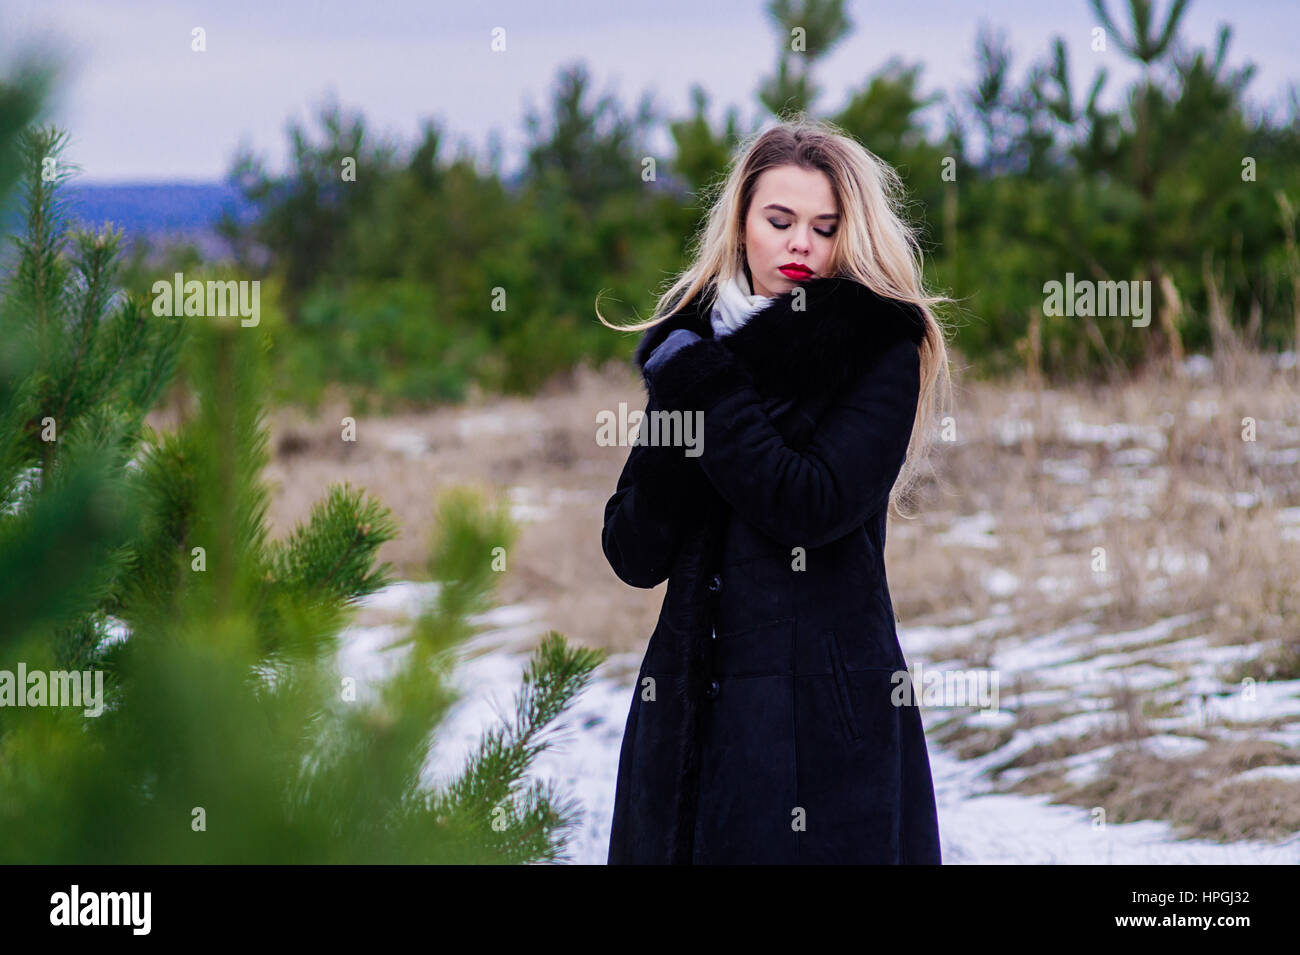 Young blond woman standing in pines and looking at camera. Stock Photo